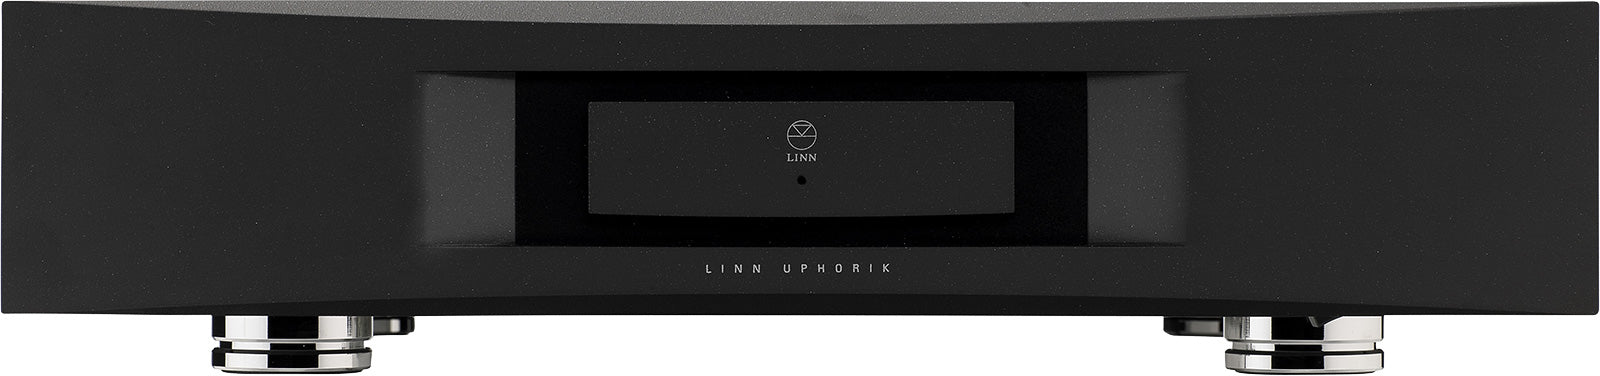 Linn Uphorik MM and MC Phono Stages